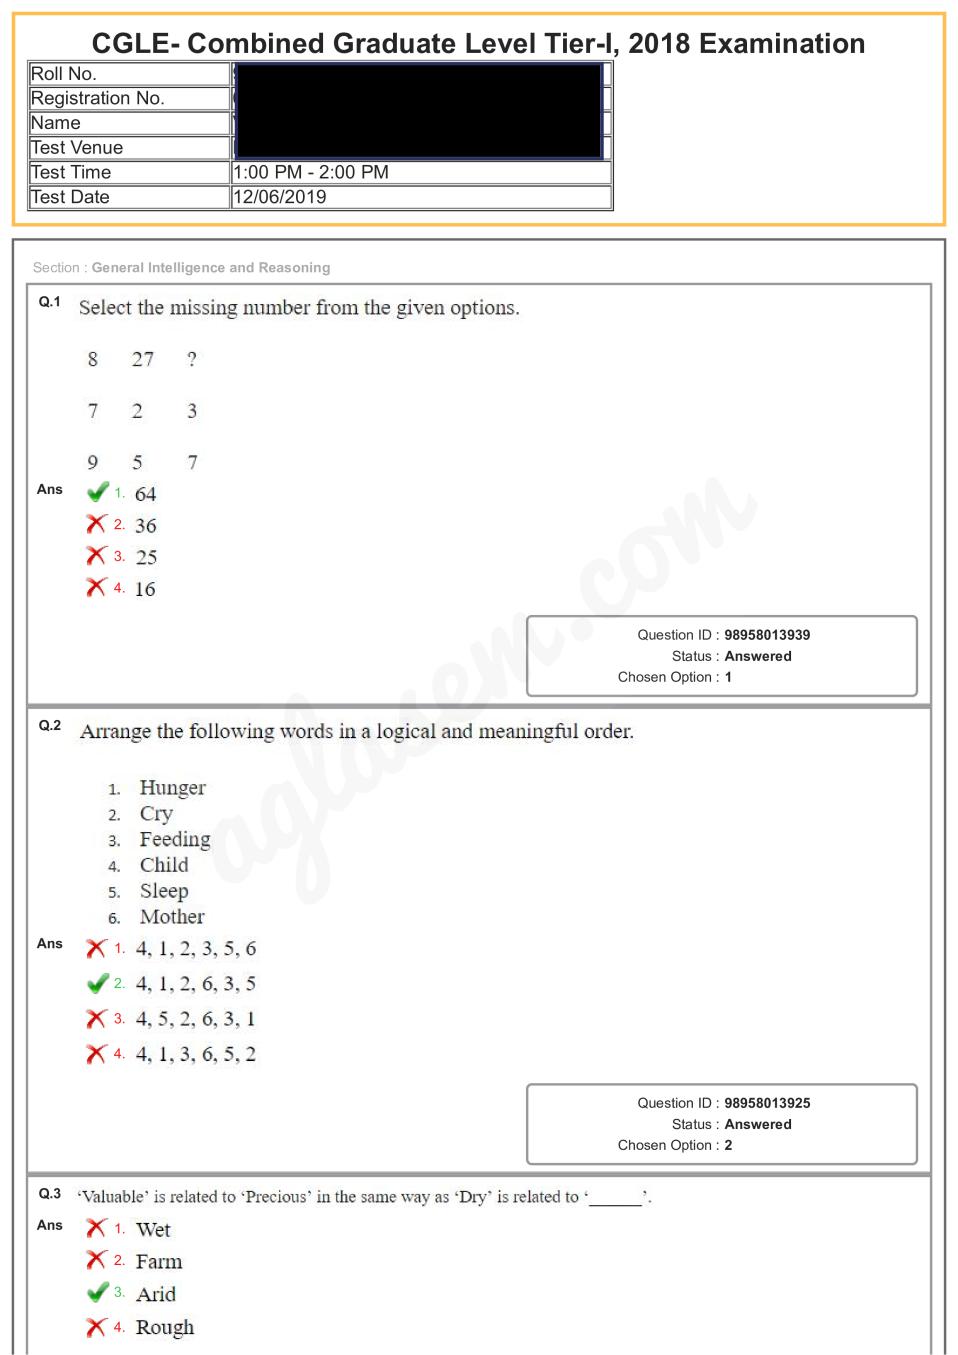 SSC CGL Question Paper Tier 1 2018 Exam - 12 jun 2019 second shift - Page 1